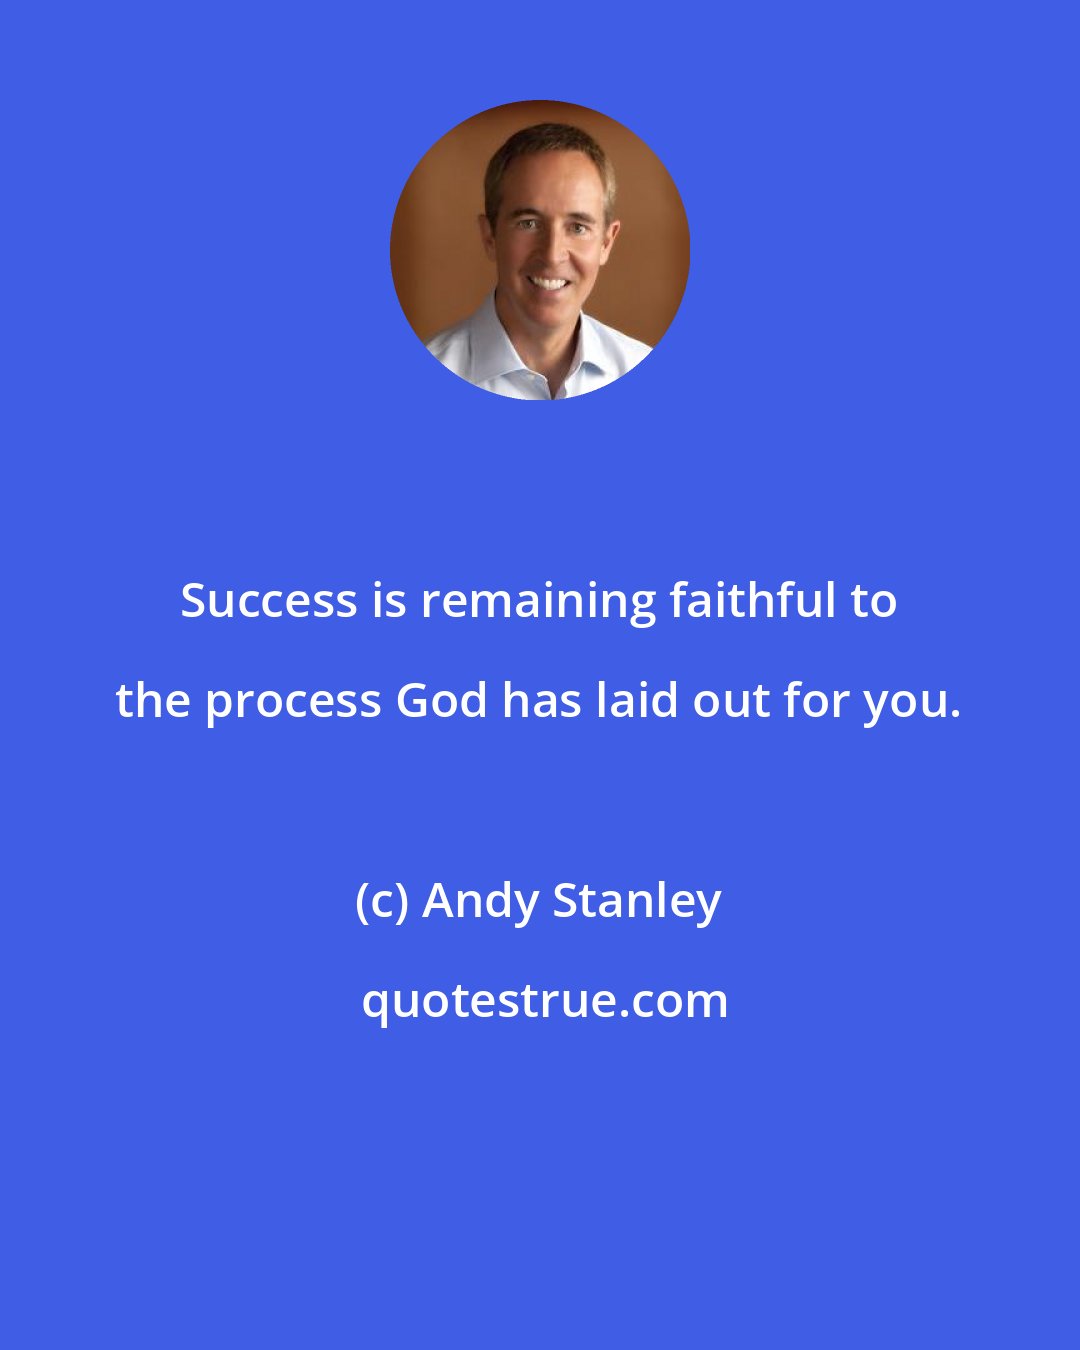 Andy Stanley: Success is remaining faithful to the process God has laid out for you.